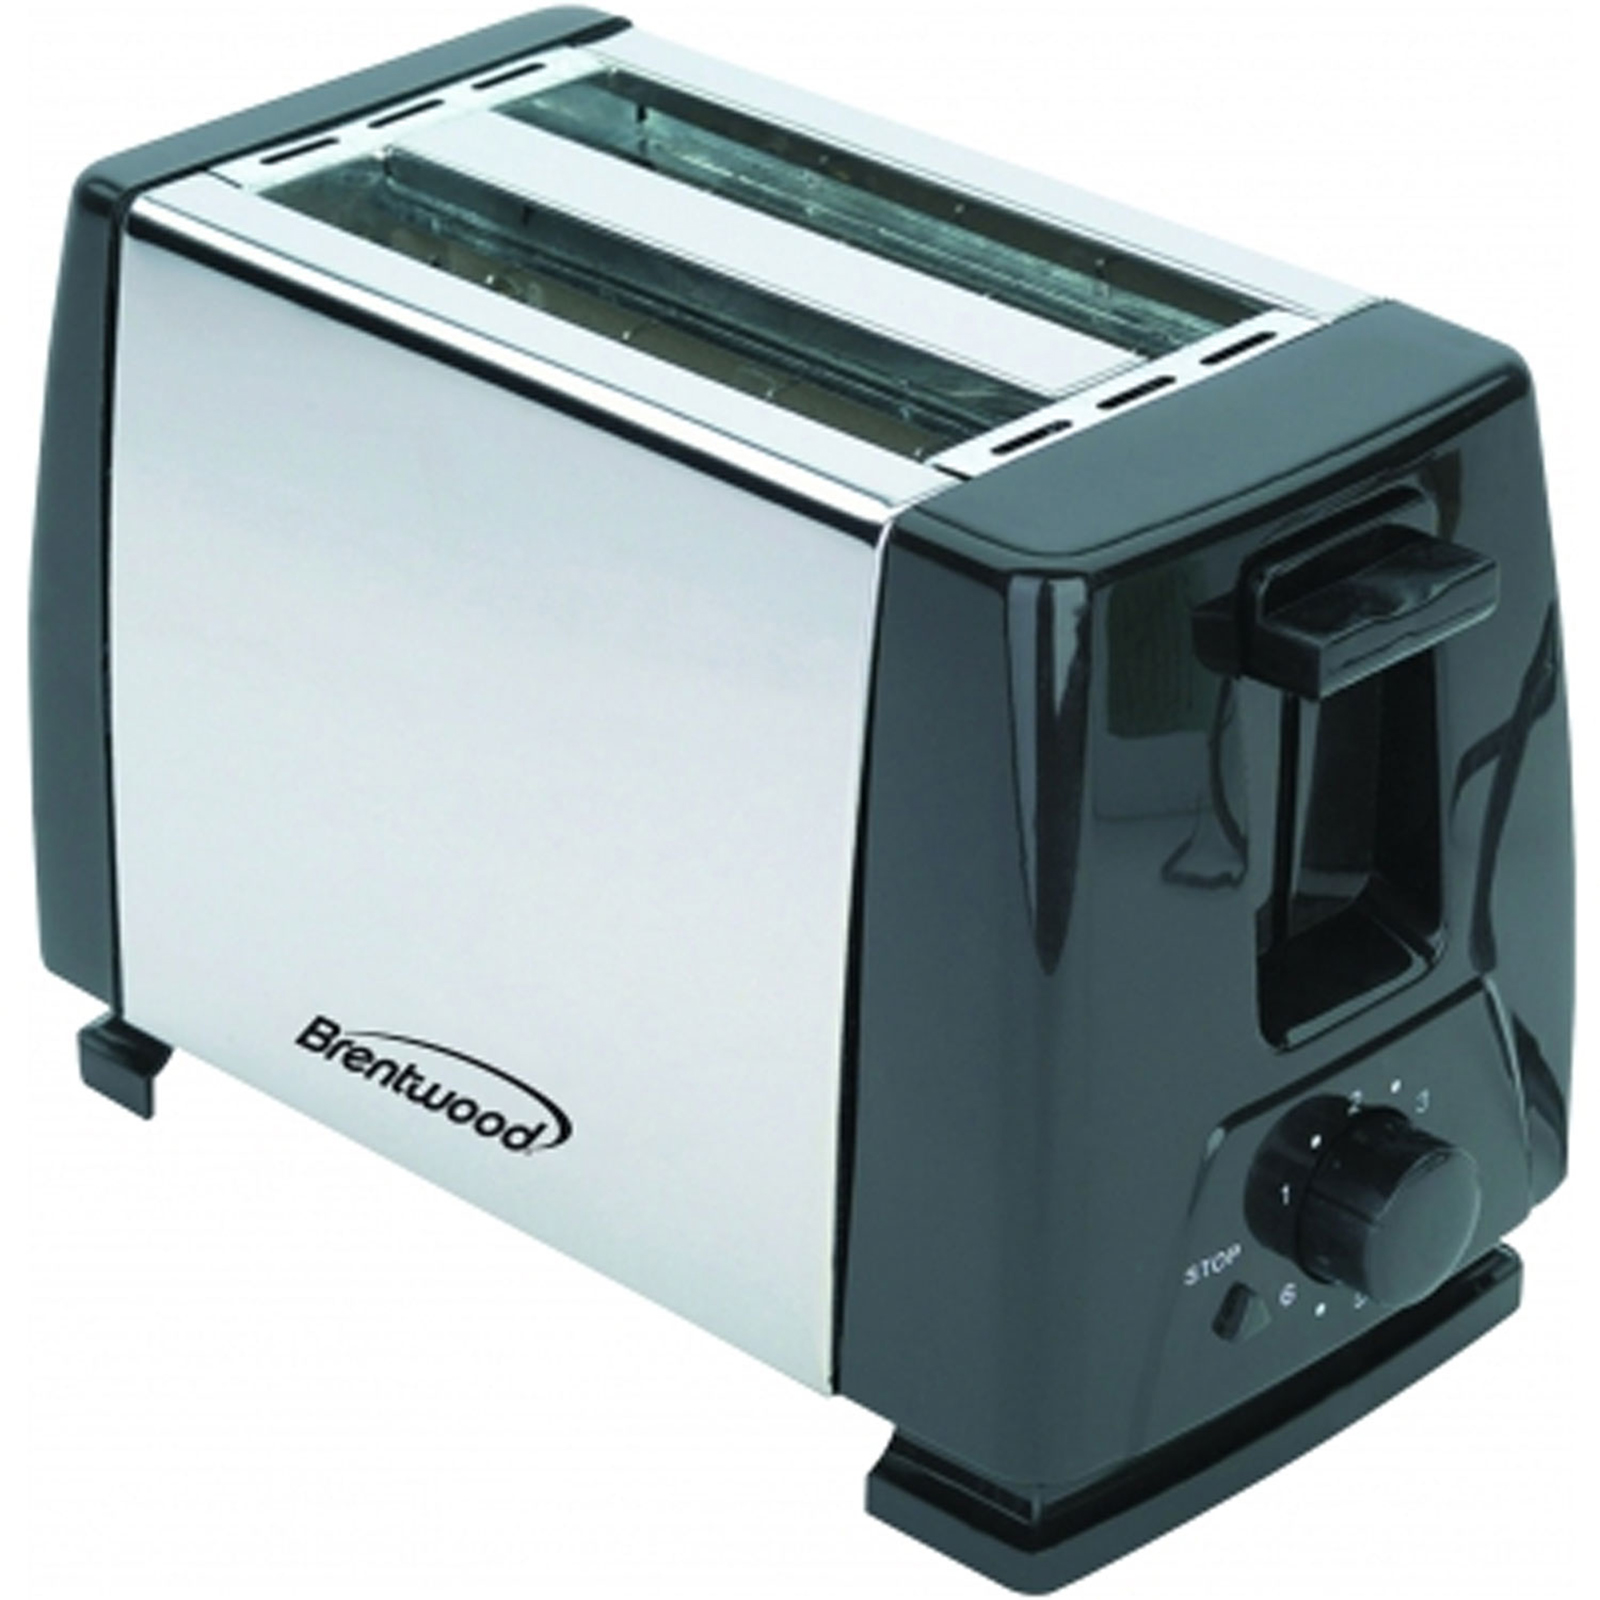 Brentwood 97083265M 2-Slice Toaster in Stainless Steel and Black